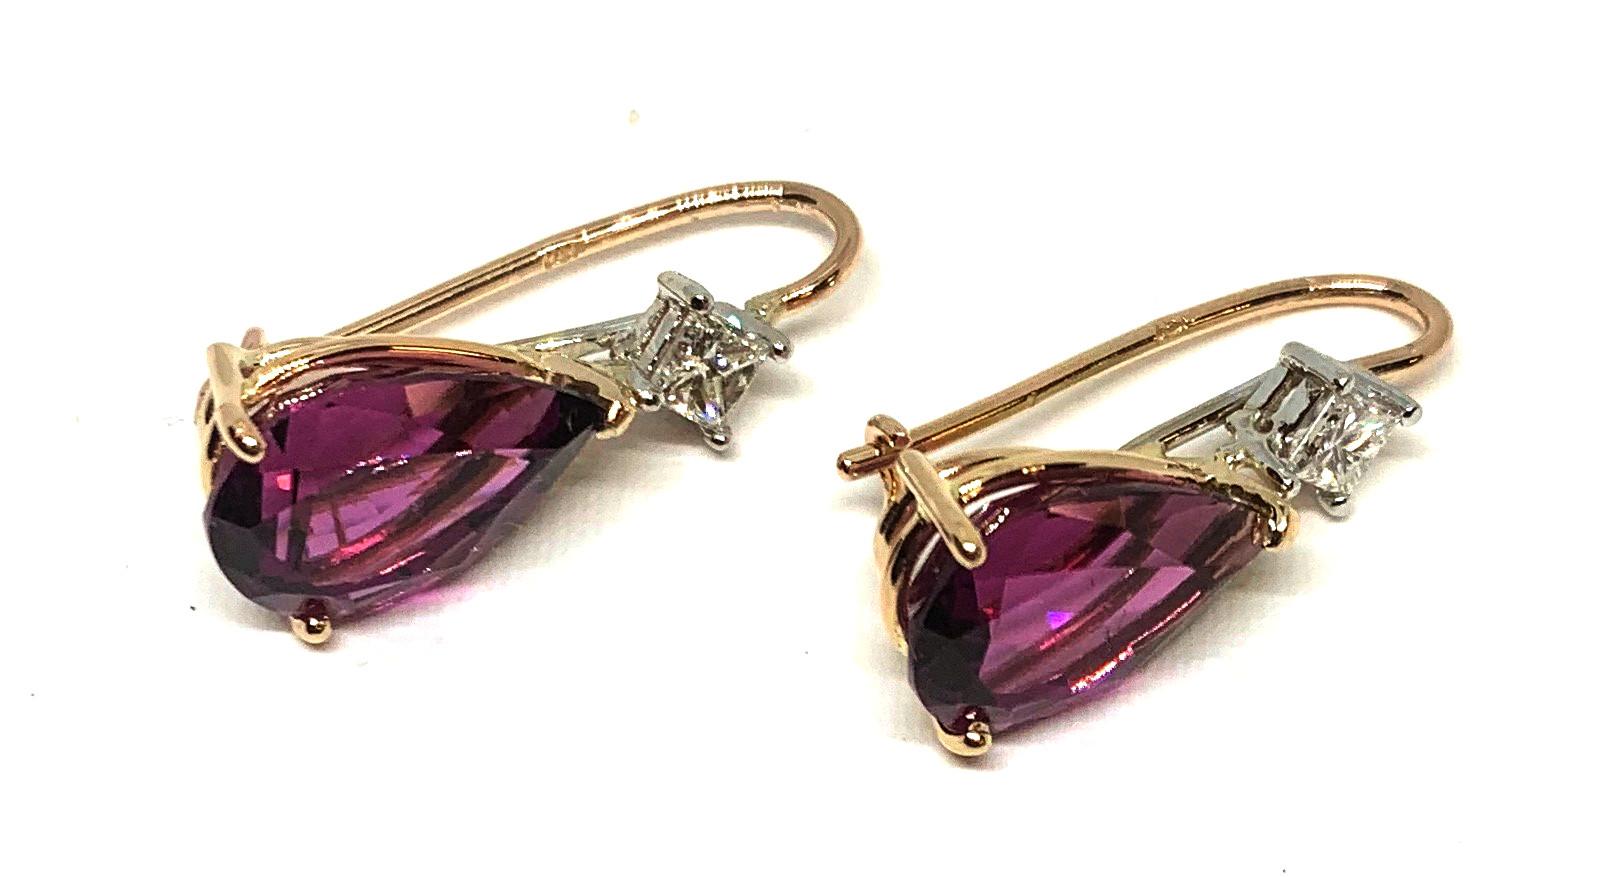 These earrings feature beautiful raspberry-red rhodolite garnets. They are a perfectly matched pair of large pear-shaped stones. Most large colored stones that are a perfect match for color and shape are hard to find. As a result, they are never